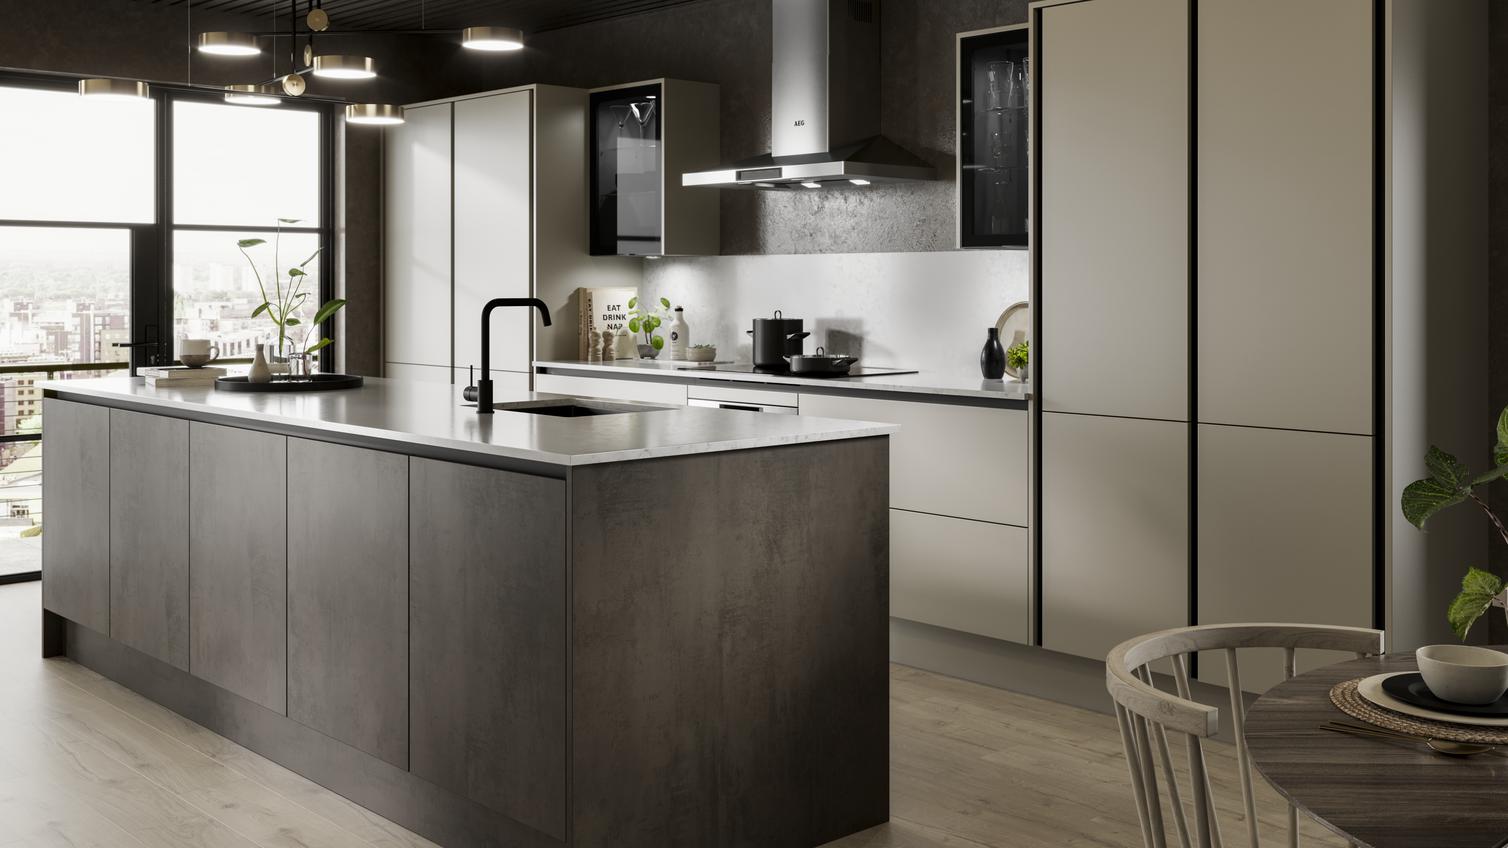 Two-tone handleless kitchen design in an island layout. Includes dark stone and cream slab cupboards and matt-black trims.